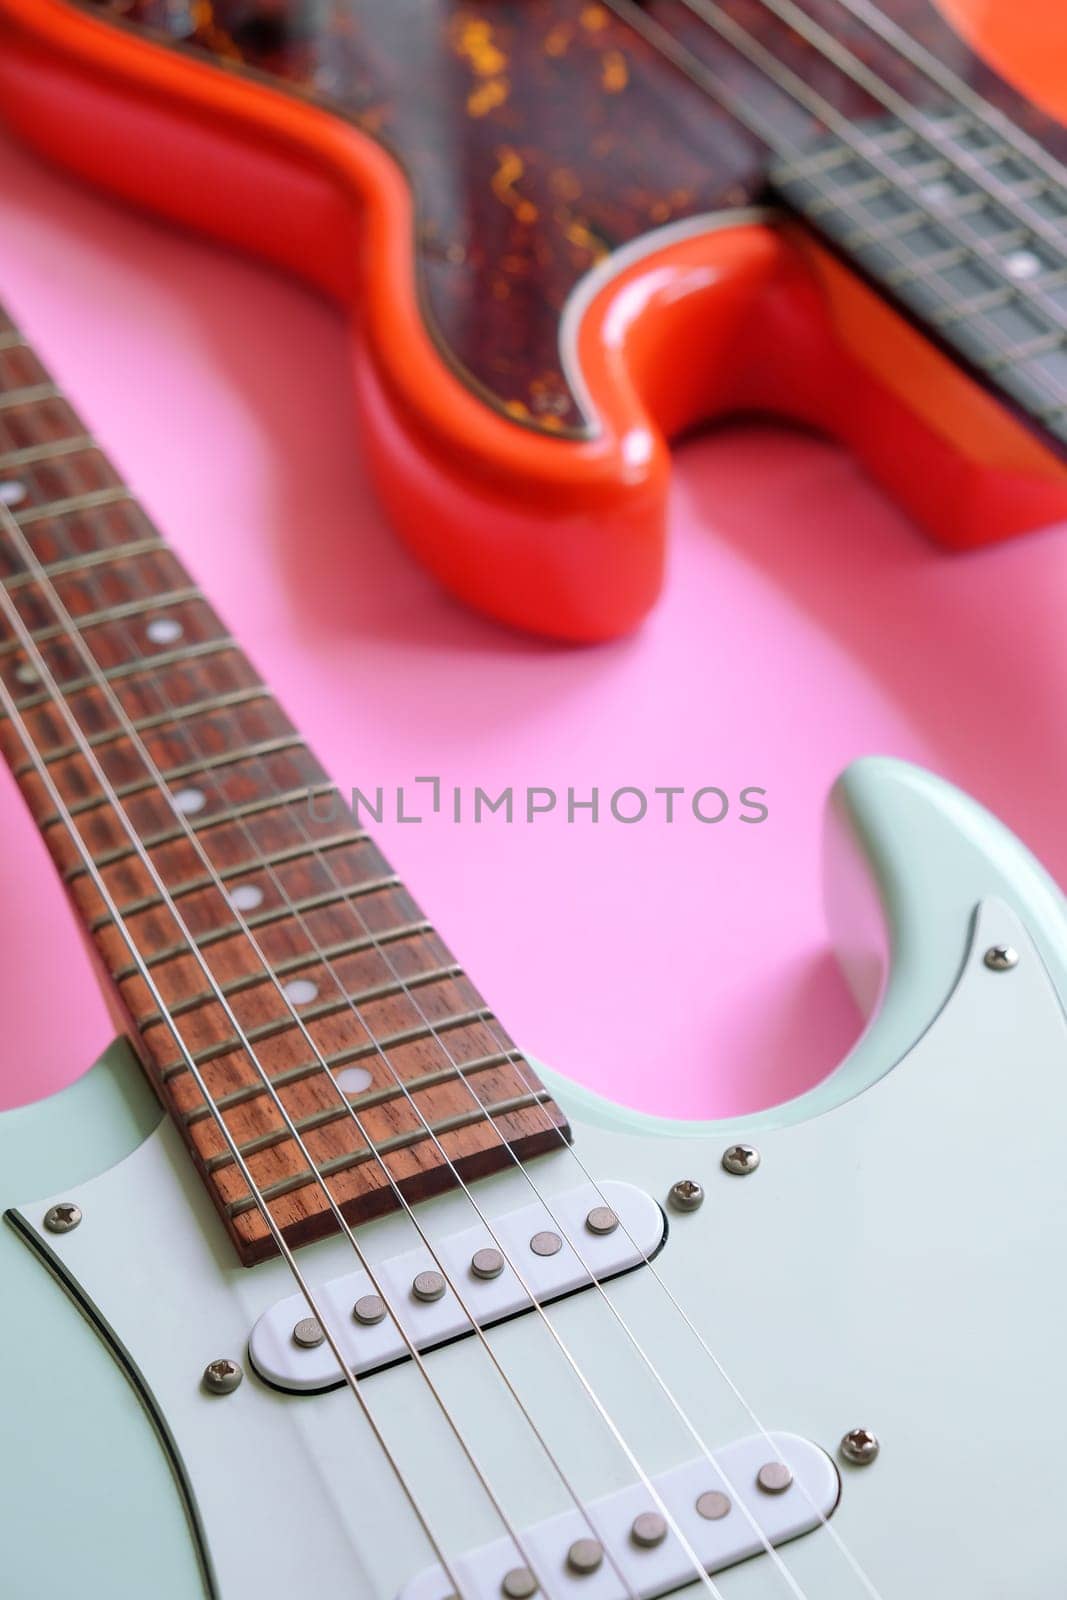 Electric guitar and bass guitar on a pink background by ponsulak